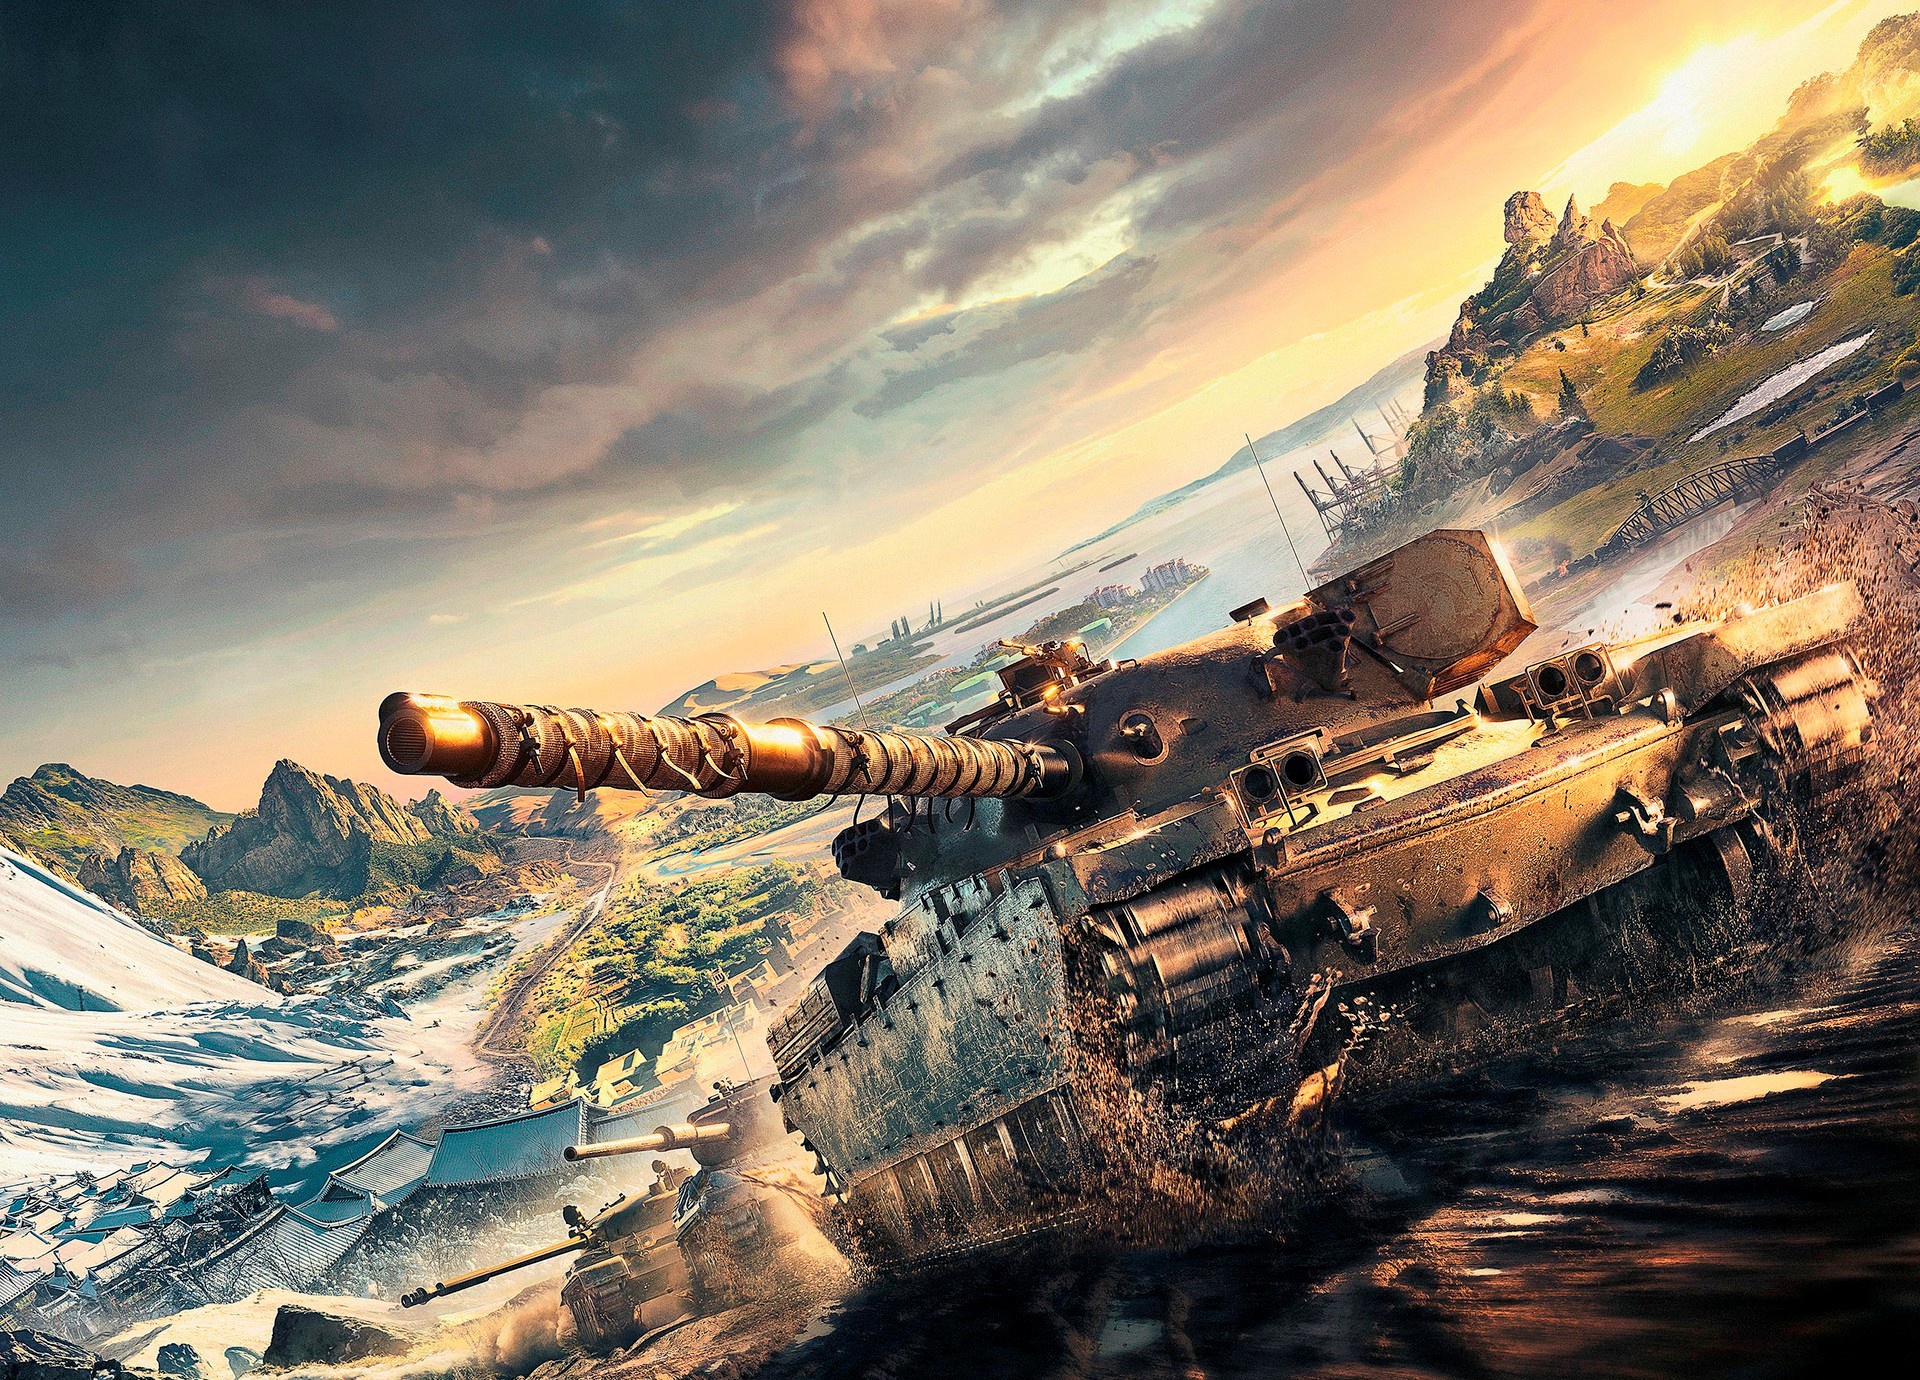 World Of Tanks Backgrounds, Pictures, Images